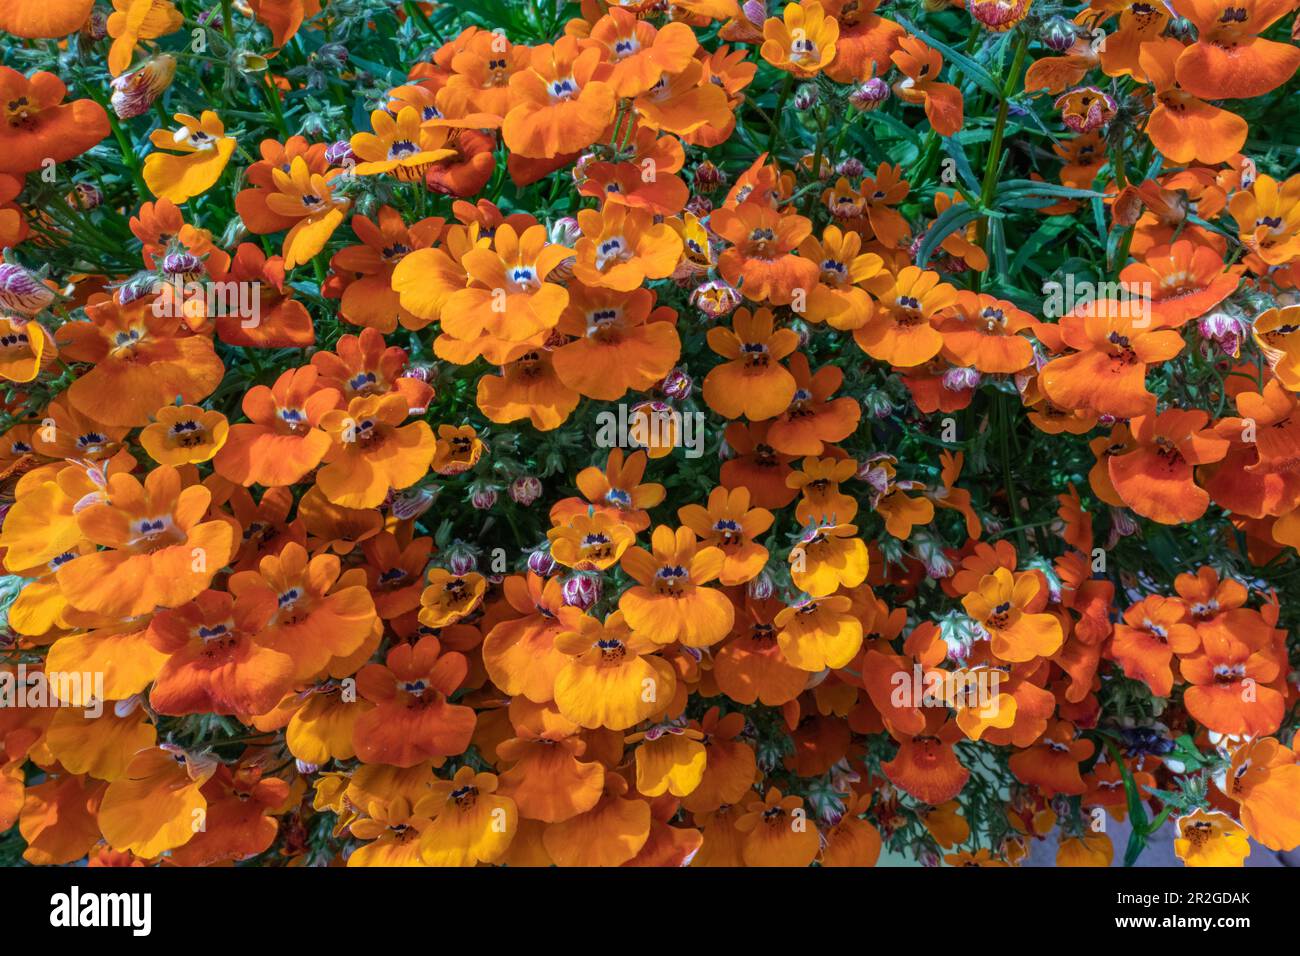 Beautiful flowers seen in the summer time with healthy, bright colored petals. Orange Cape-jewels Nemesia strumosa Benth. Stock Photo